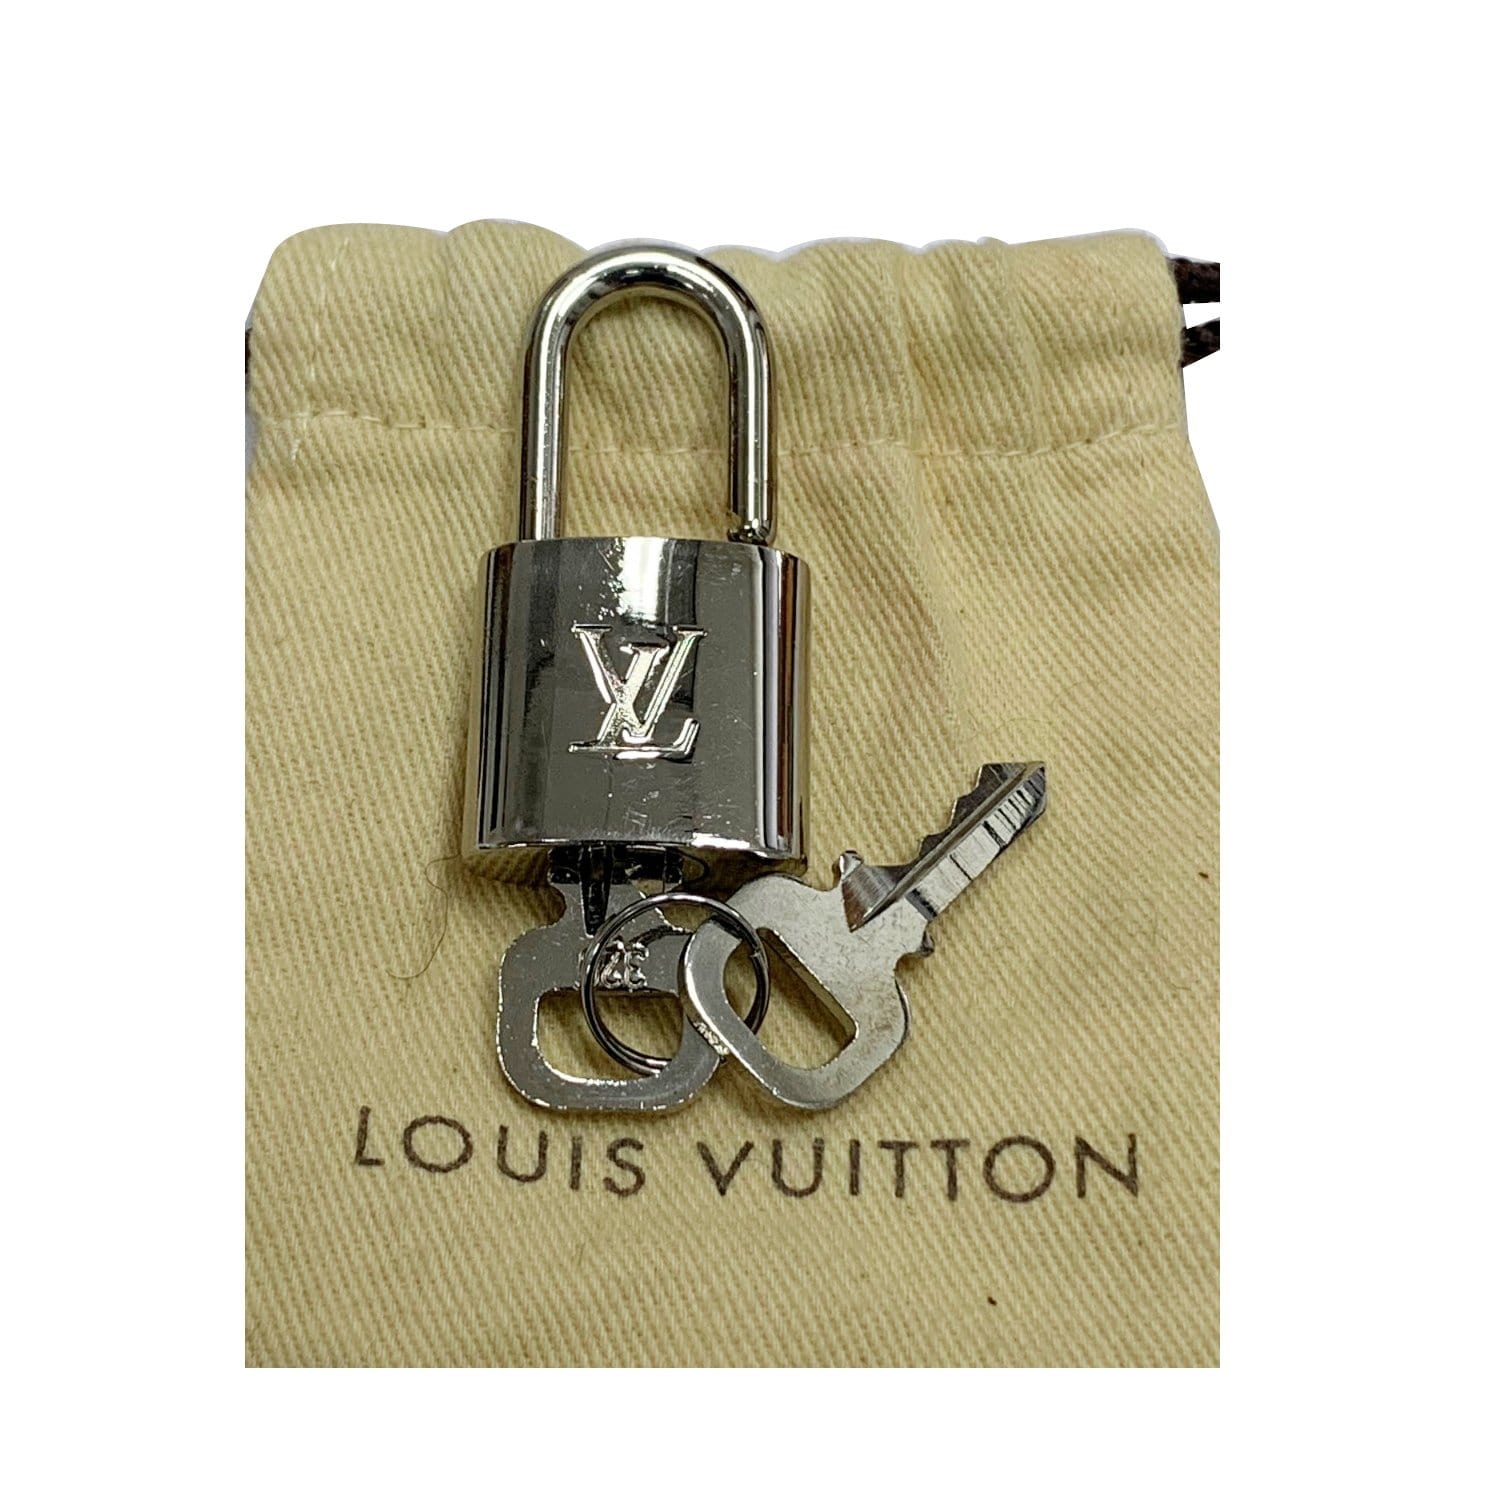 Vintage Louis Vuitton Lock Necklace - Shop Jewelry at BitterSweet